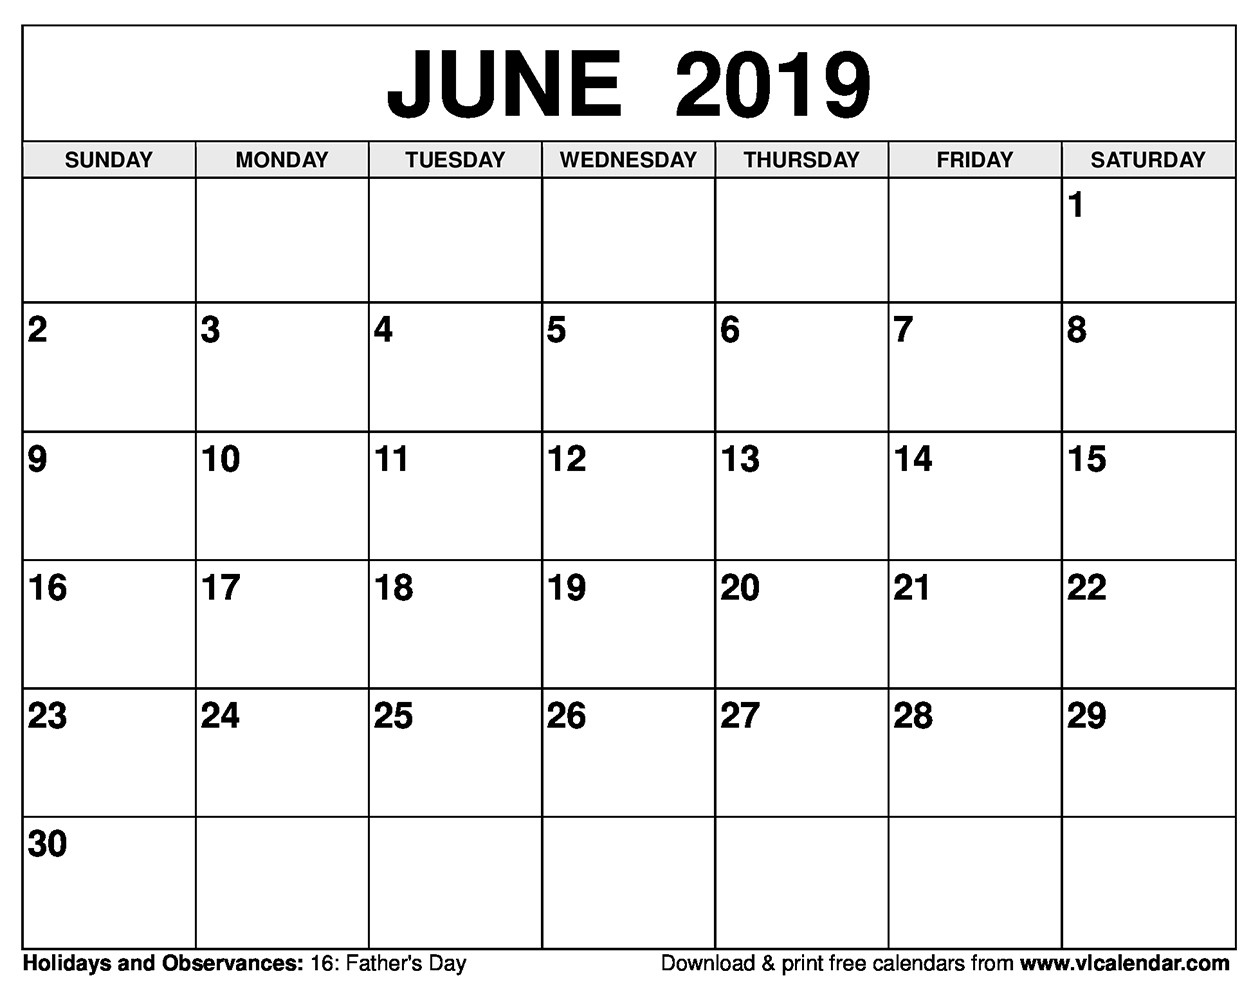 Print Free Calendars Without Downloading  Calendar Template 2021 with regard to Print Free Calendars Without Downloading